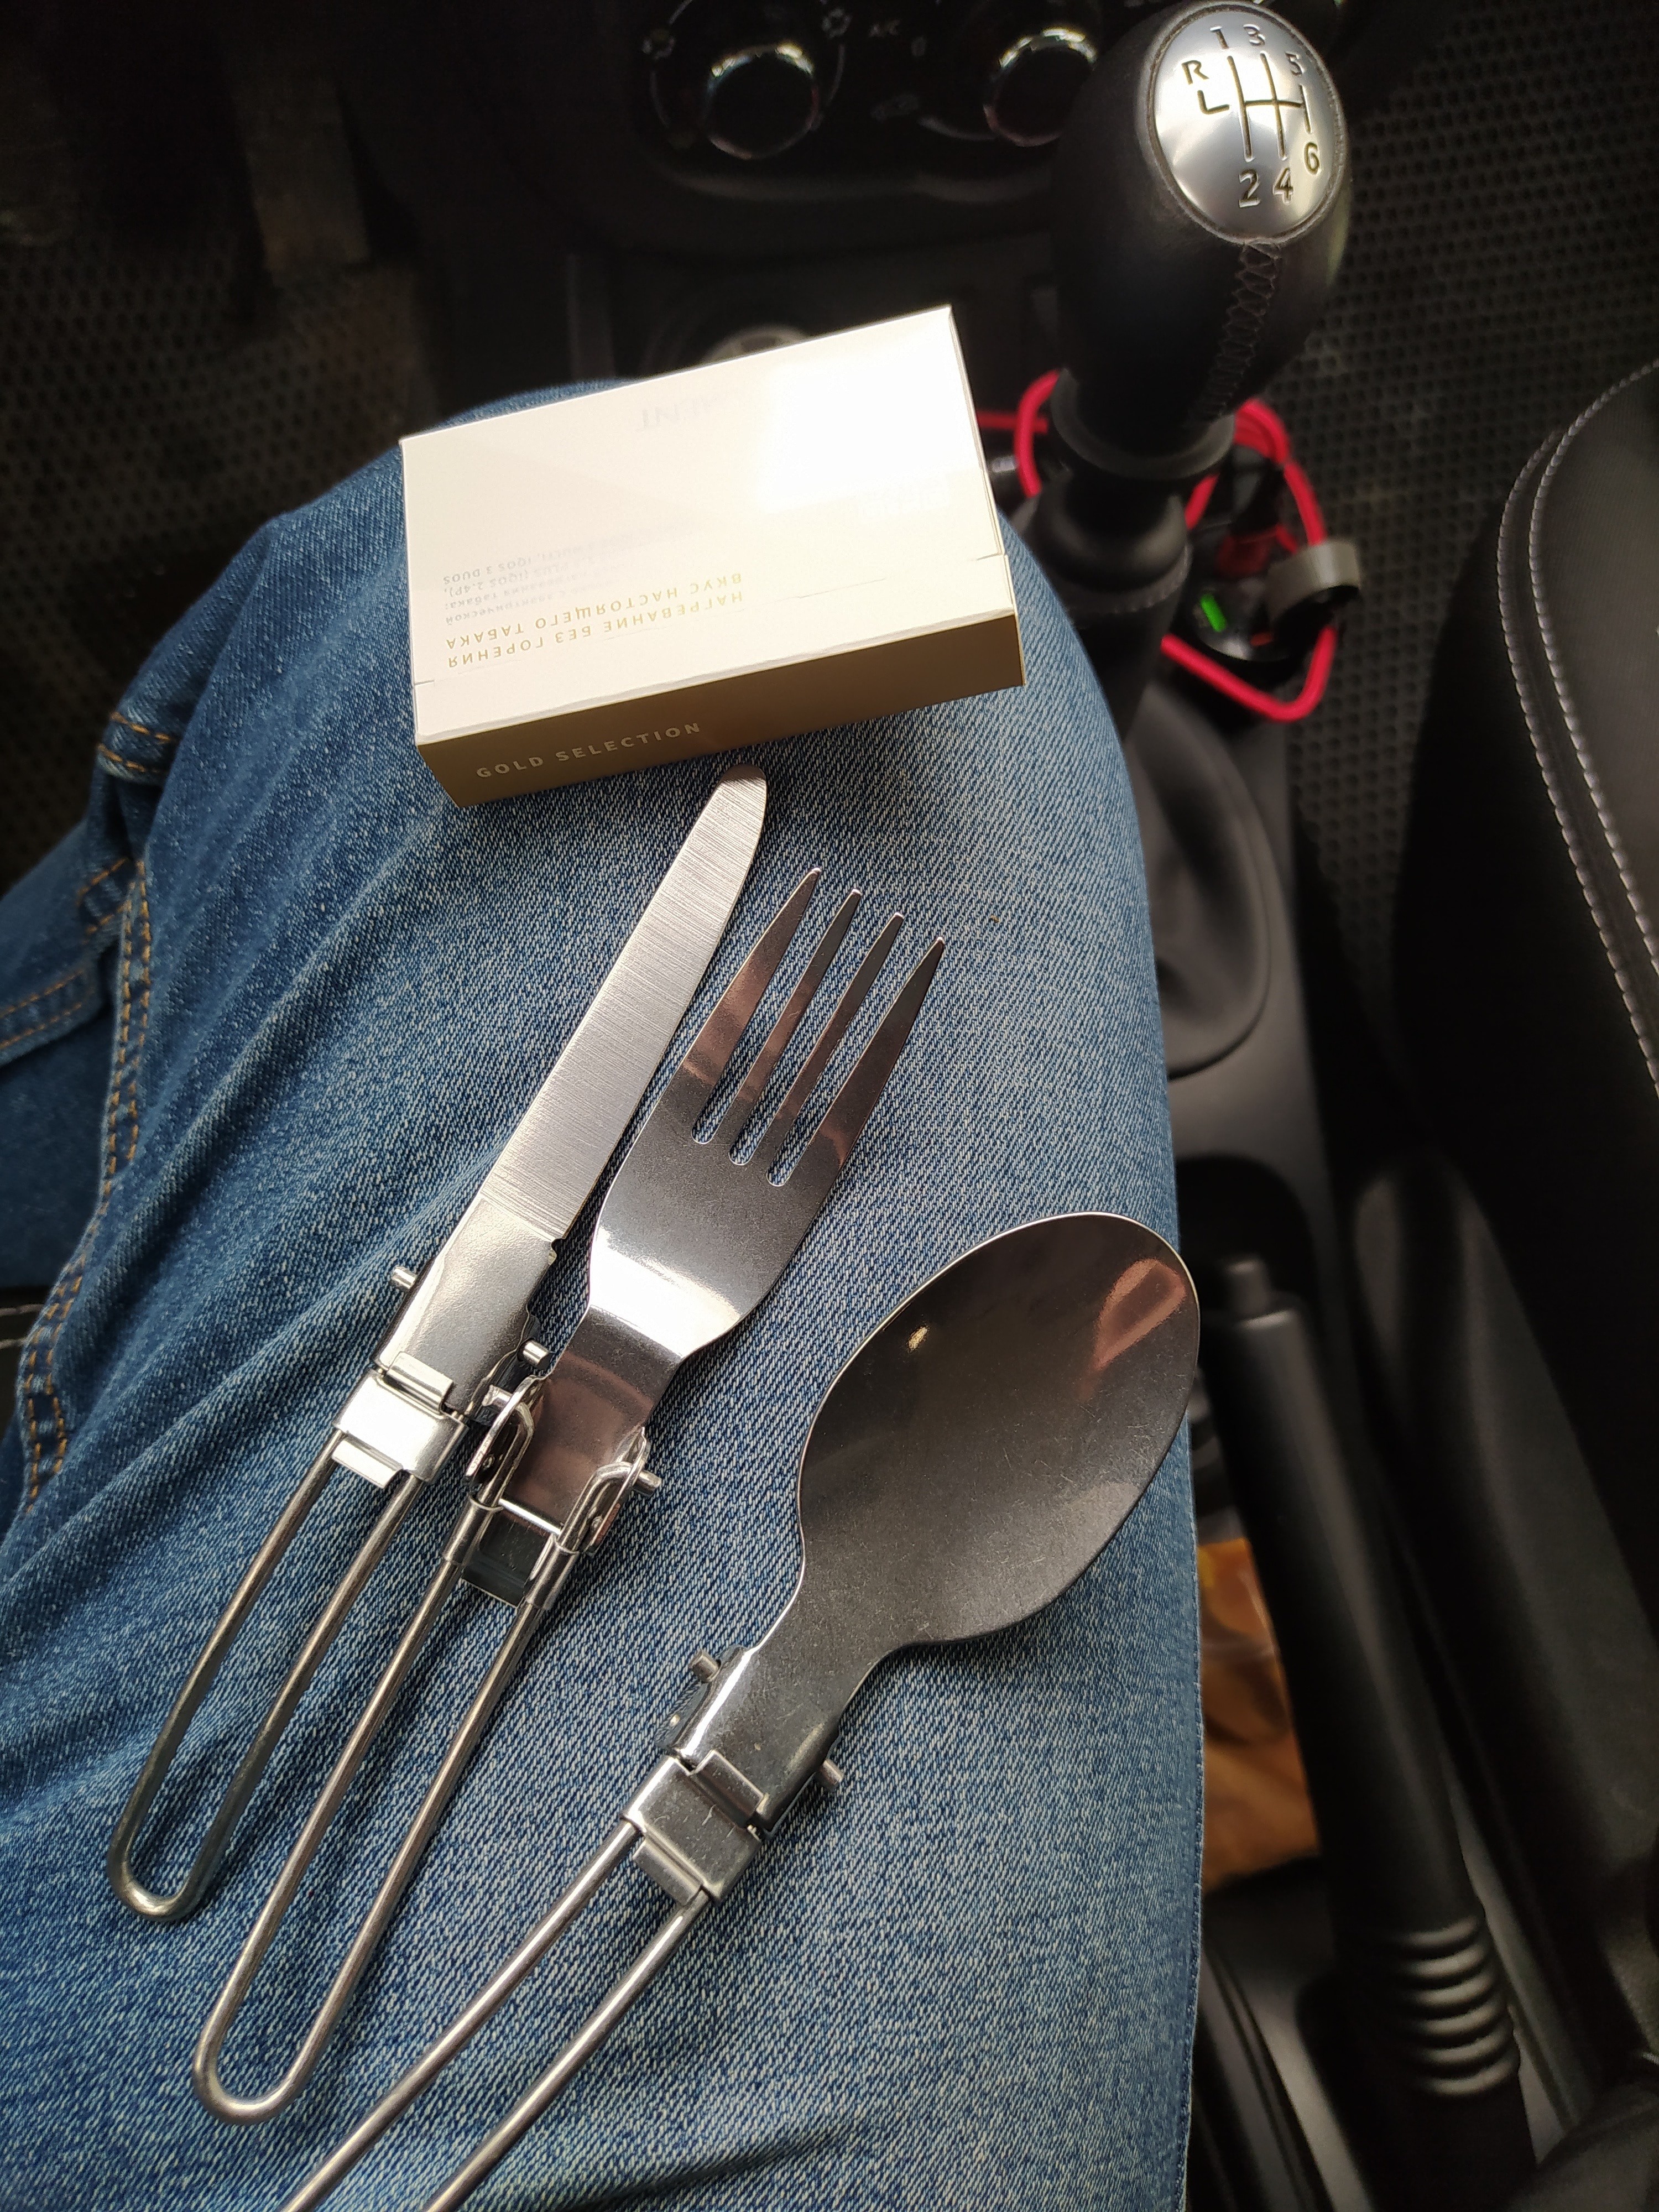 Widesea 3-piece Foldable Stainless Steel Cutlery Set photo review